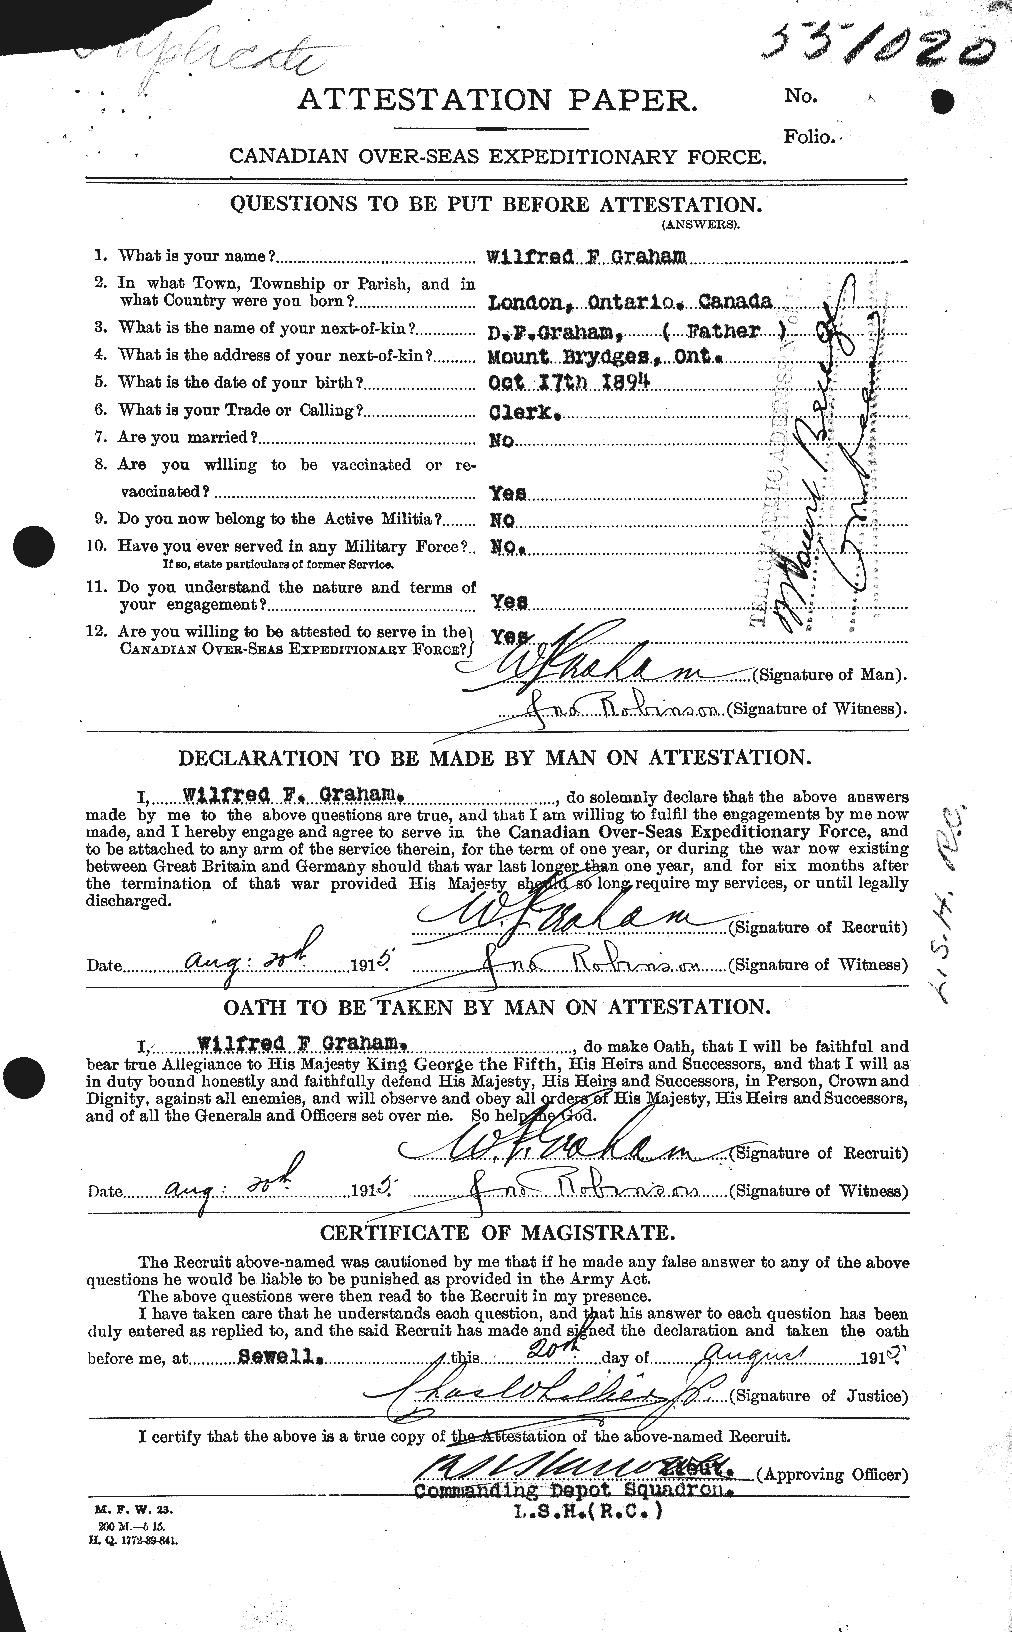 Personnel Records of the First World War - CEF 362675a